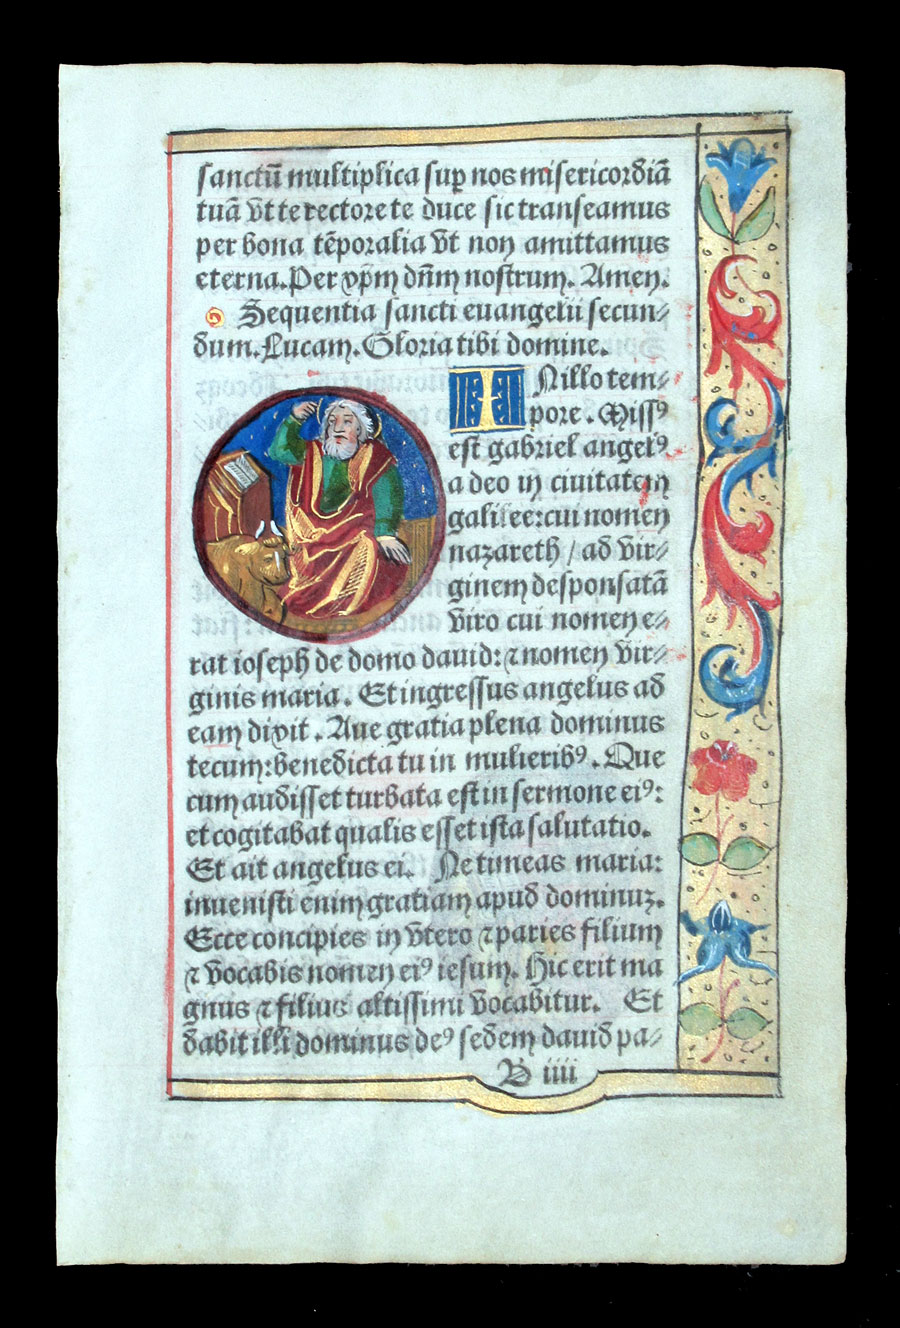 c 1532 Book of Hours Leaf - Luke and Matthew, Annunciation Text